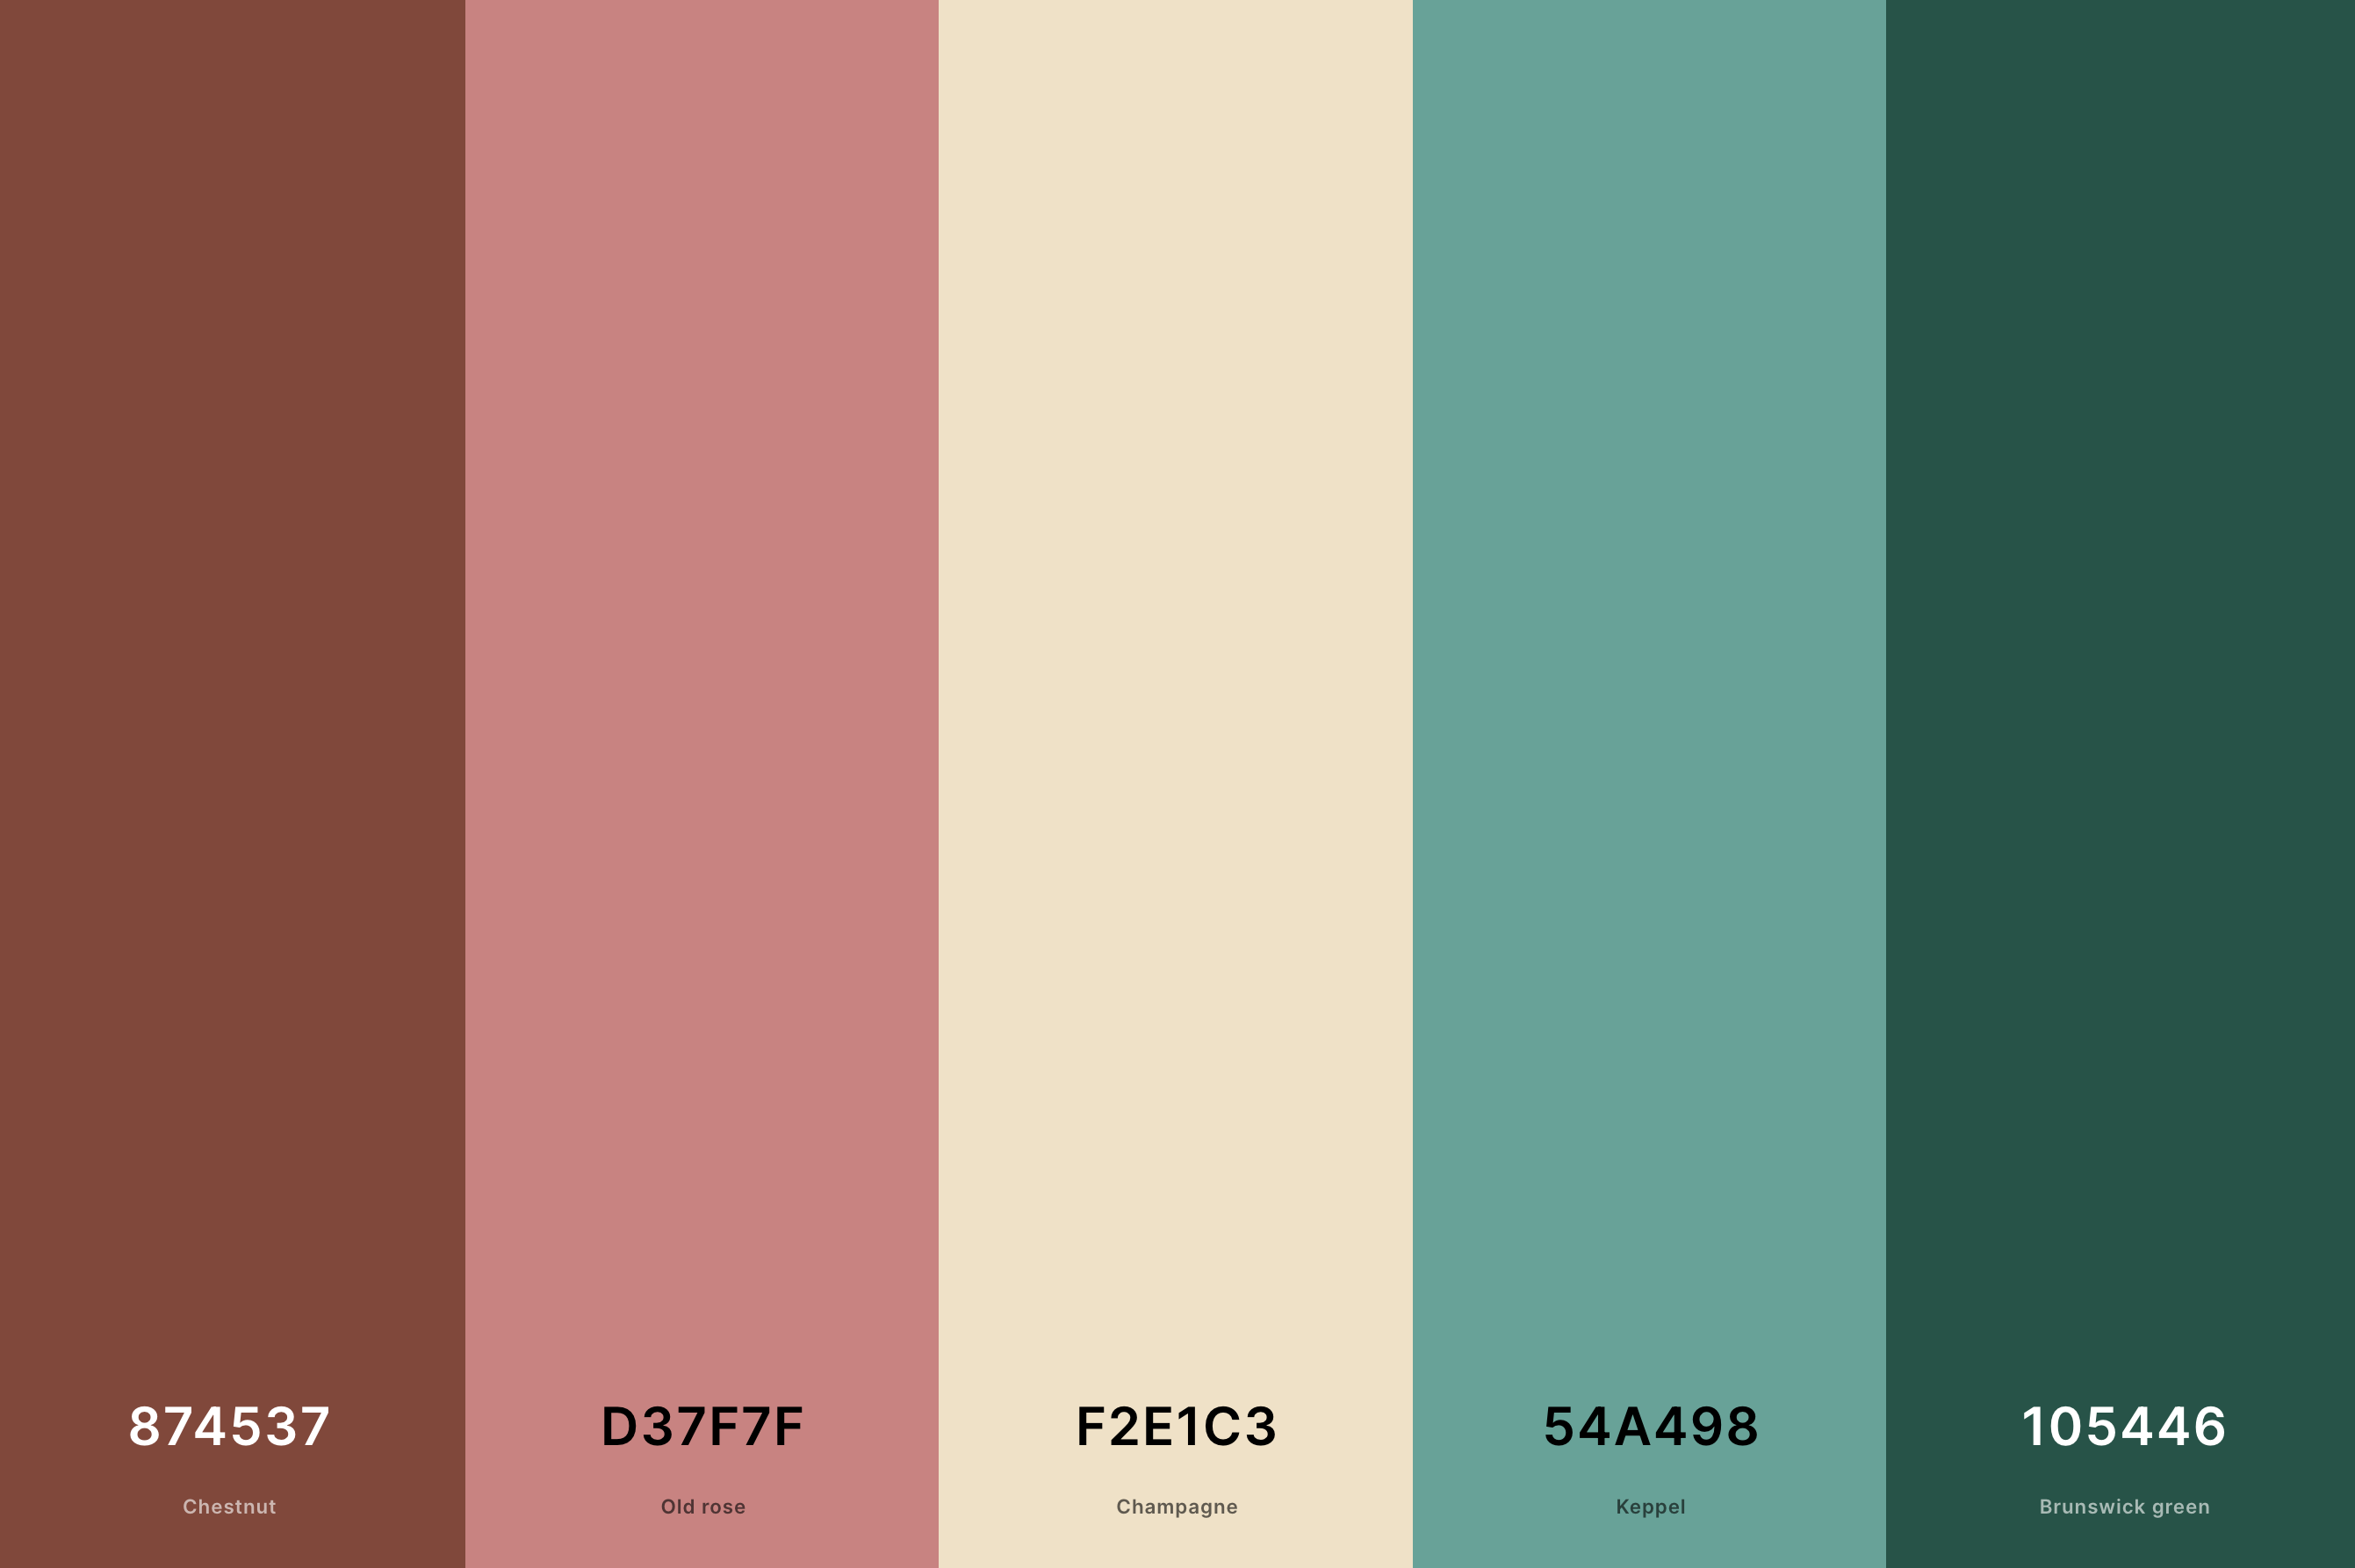 12. Retro Mid Century Modern Color Palette Color Palette with Chestnut (Hex #874537) + Old Rose (Hex #D37F7F) + Champagne (Hex #F2E1C3) + Keppel (Hex #54A498) + Brunswick Green (Hex #105446) Color Palette with Hex Codes